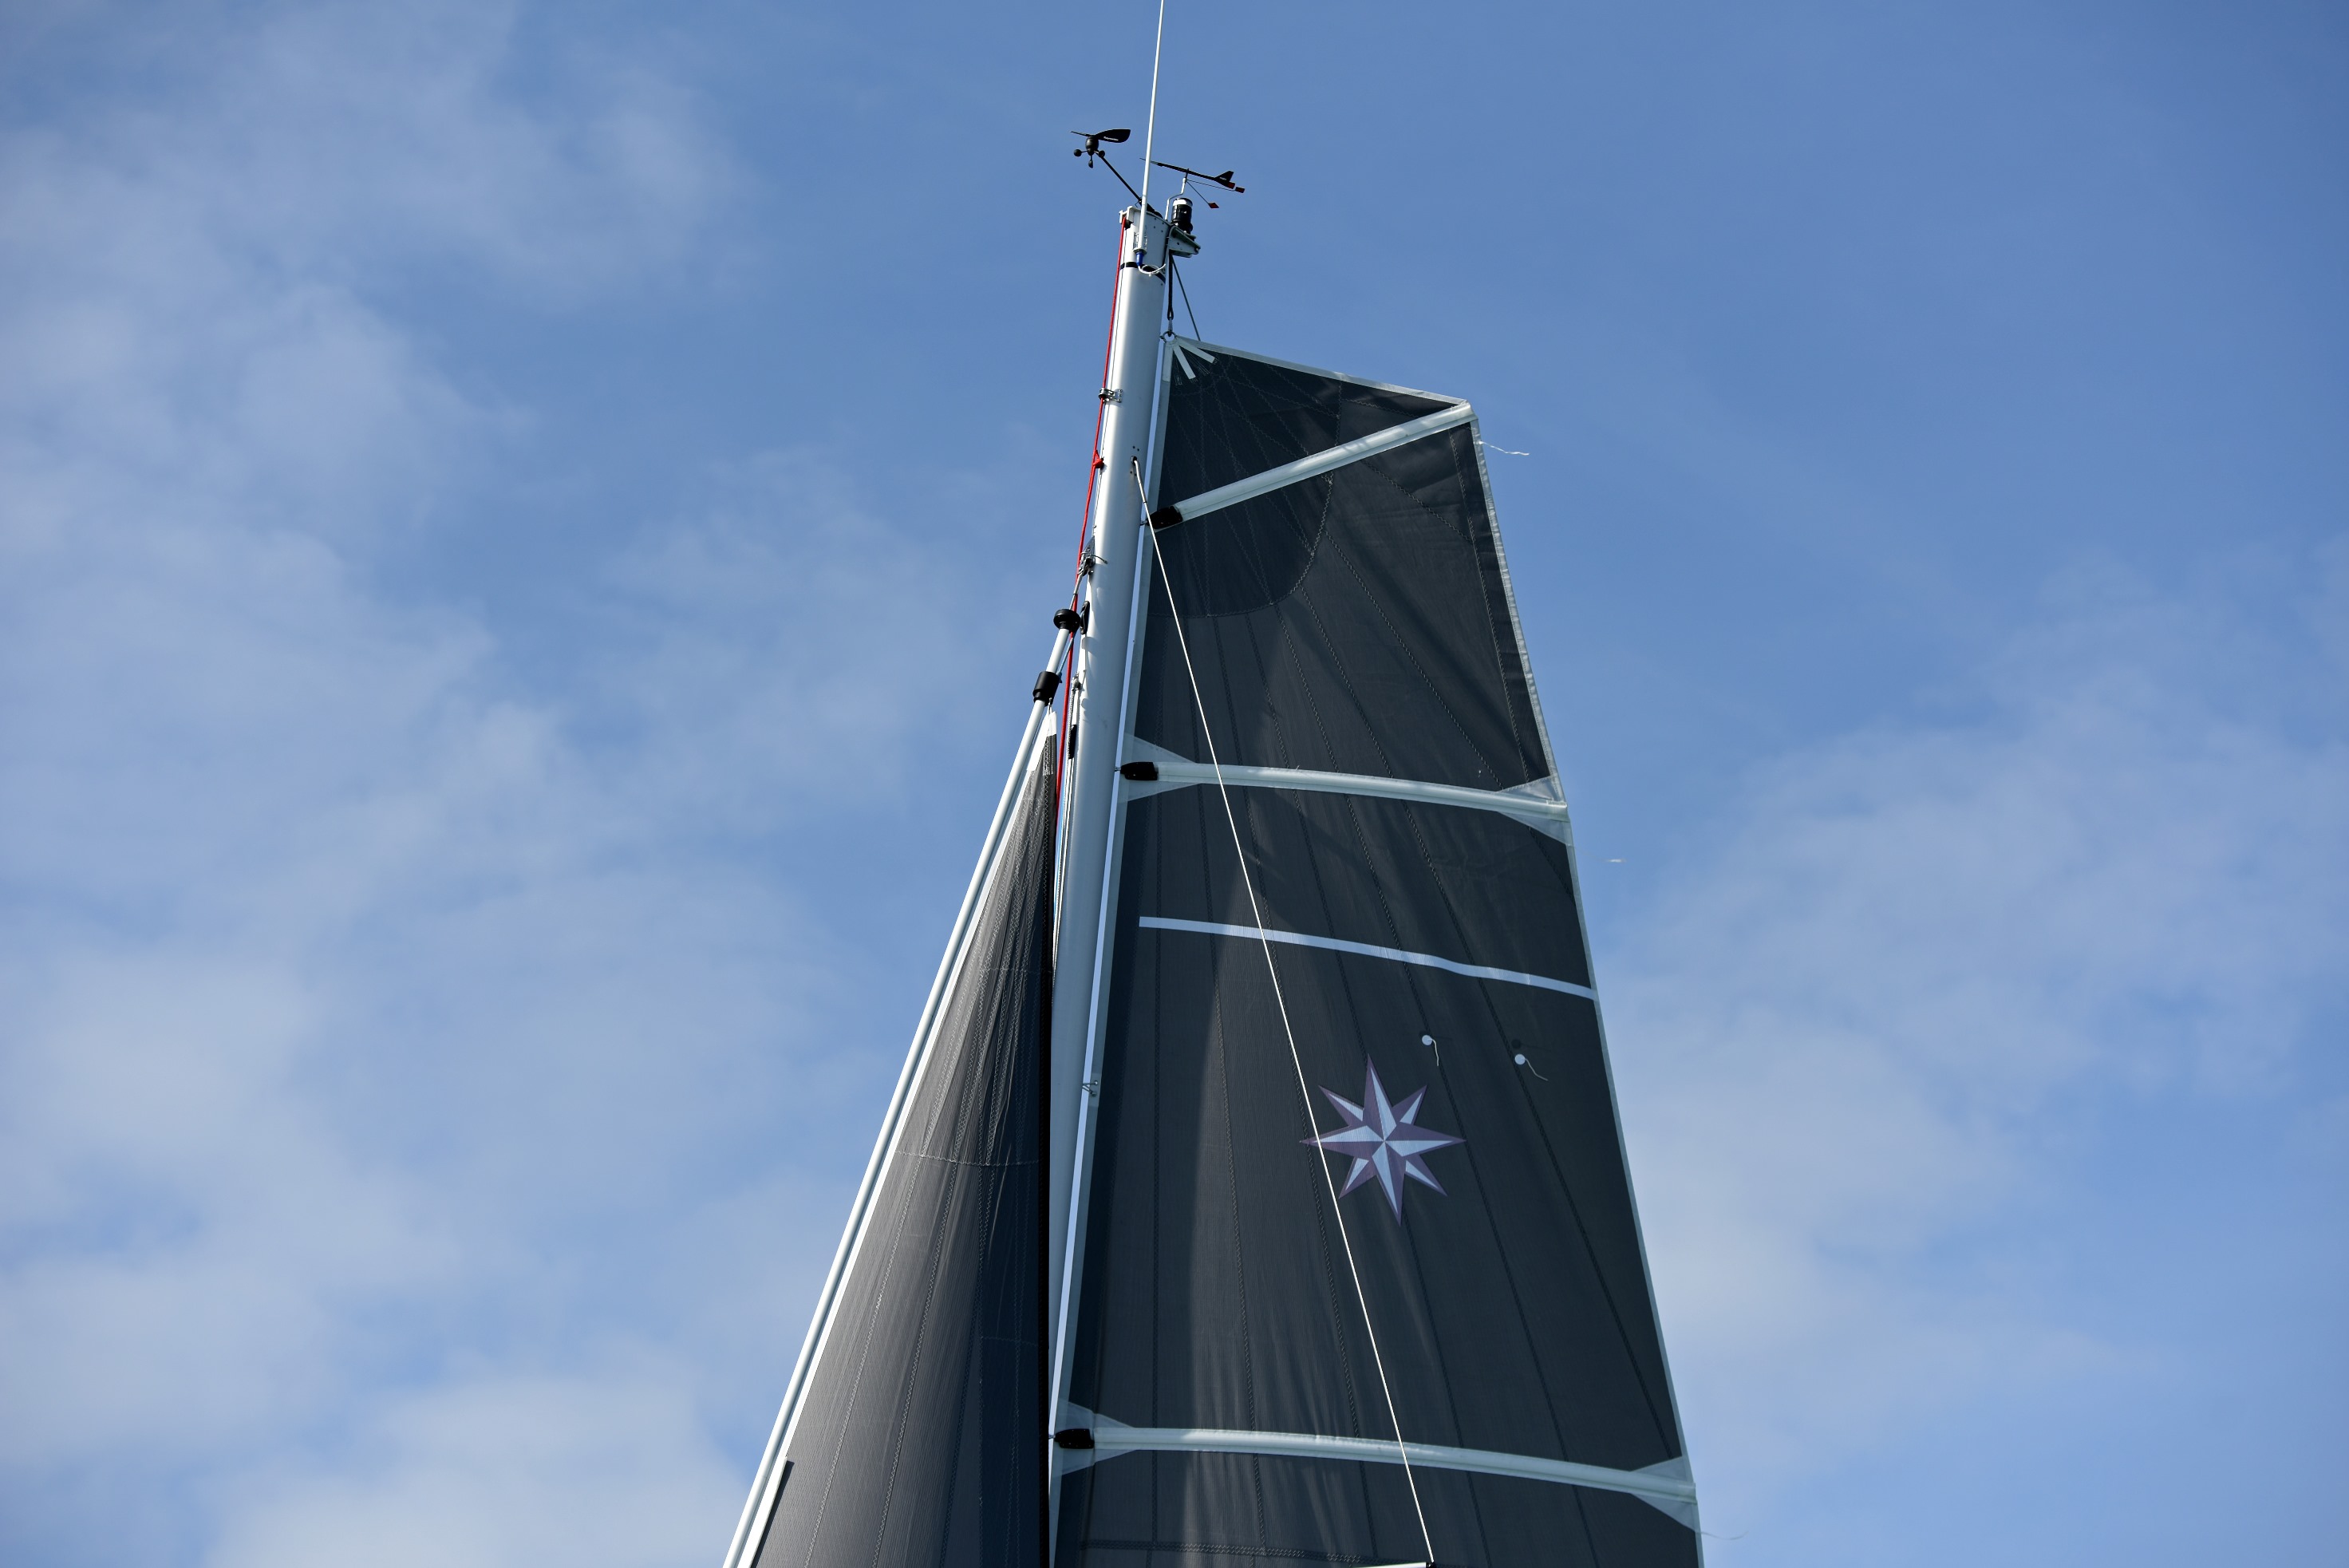 sun-odyssey-380-with-swing-keel-option_6152fa6687d02